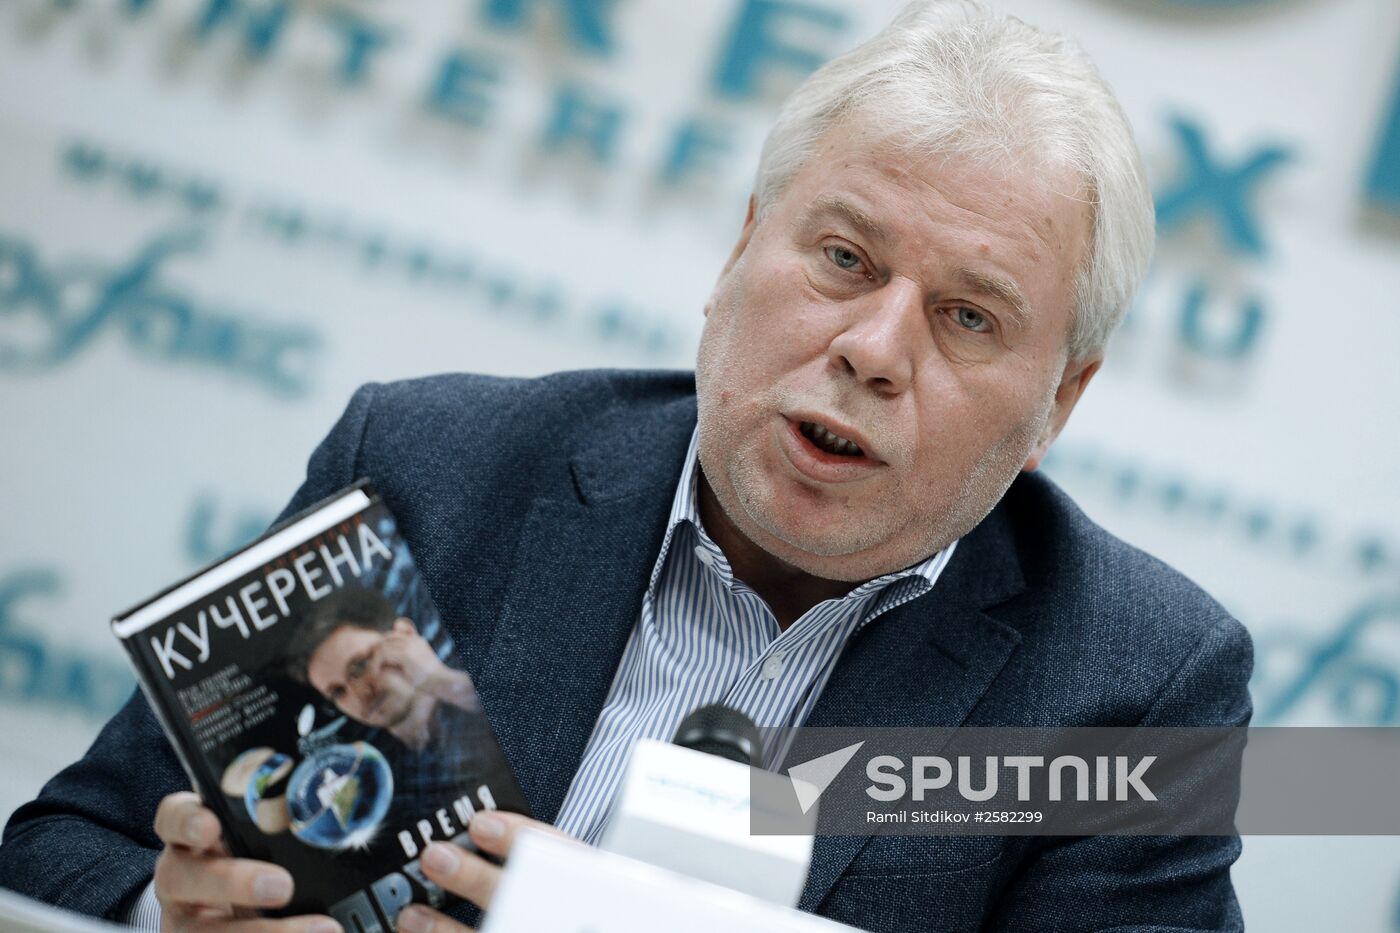 Presentation of Anatoly Kucheryona's book "Time of the Squid"